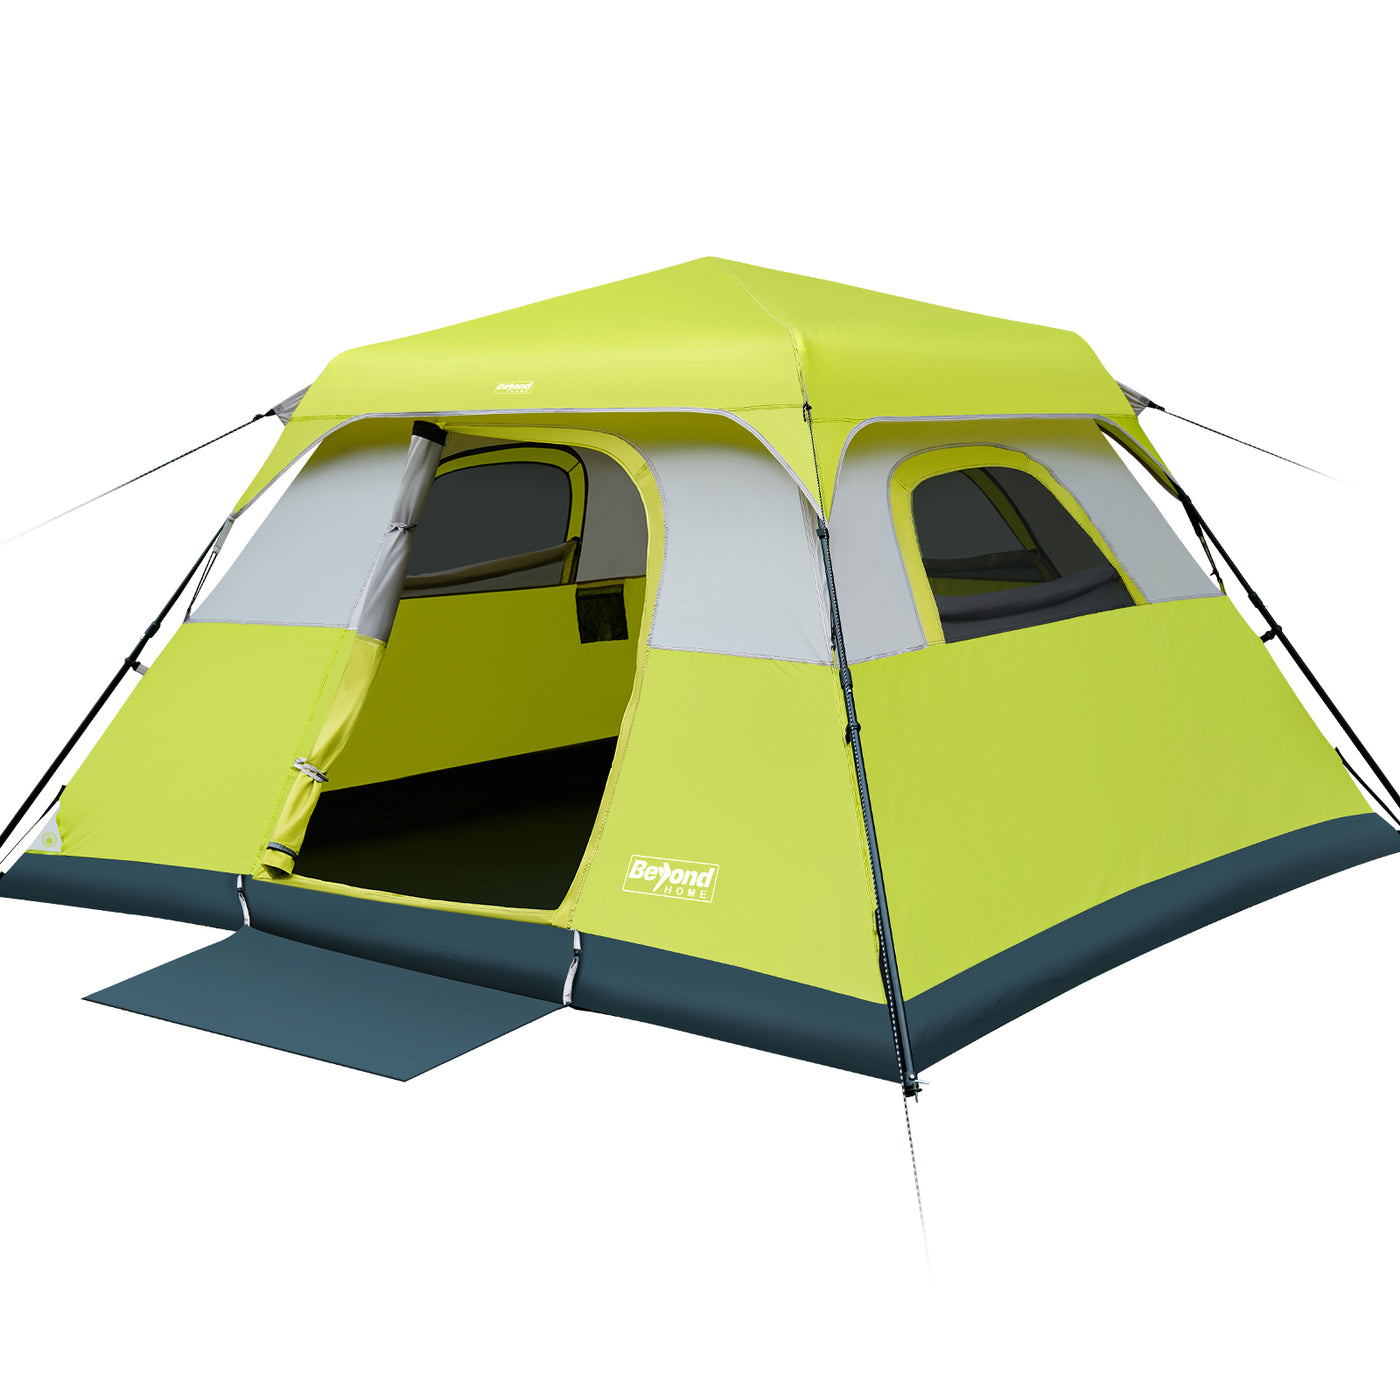 BeyondHOME Instant Cabin 6 Person Camping Tent-Sky Blue